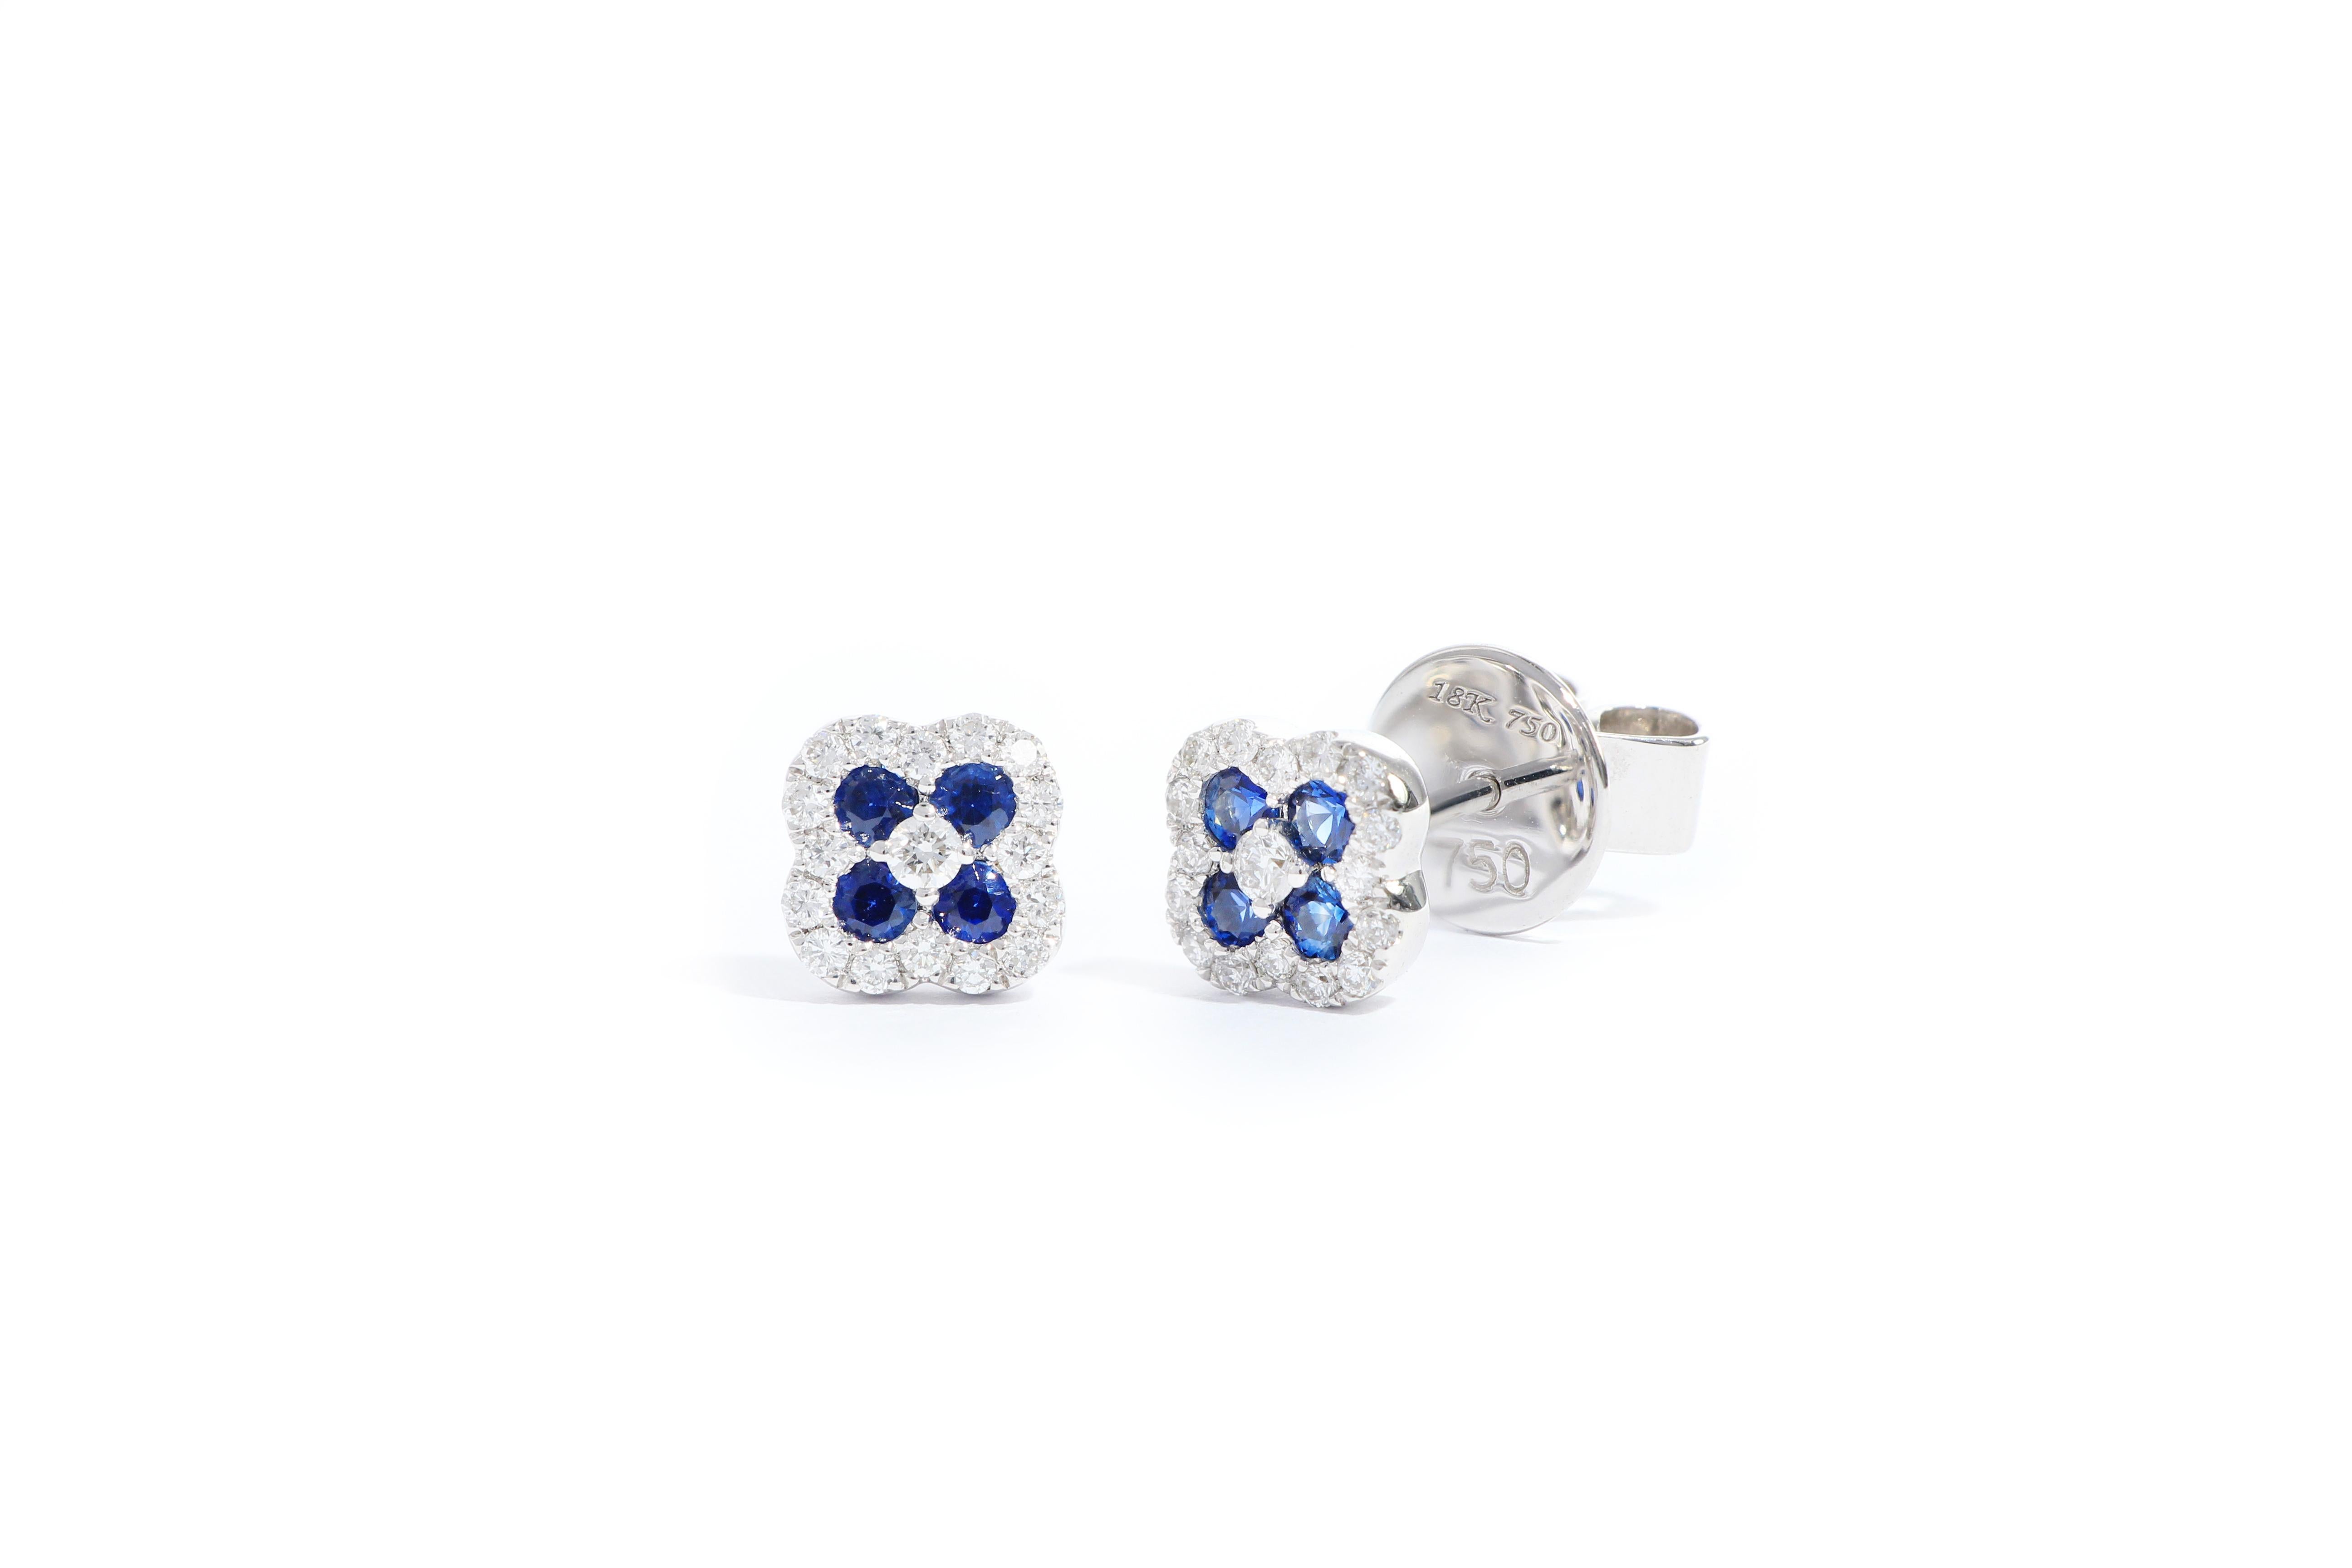 This Art Deco style earrings is very elegant and fashionable, set with natural sapphire  totaling 0.31cts in floral pattern,  decorated with brilliant-cut diamonds weighing 0.19cts, mounted in 18 karat white gold.
You could wear them for every